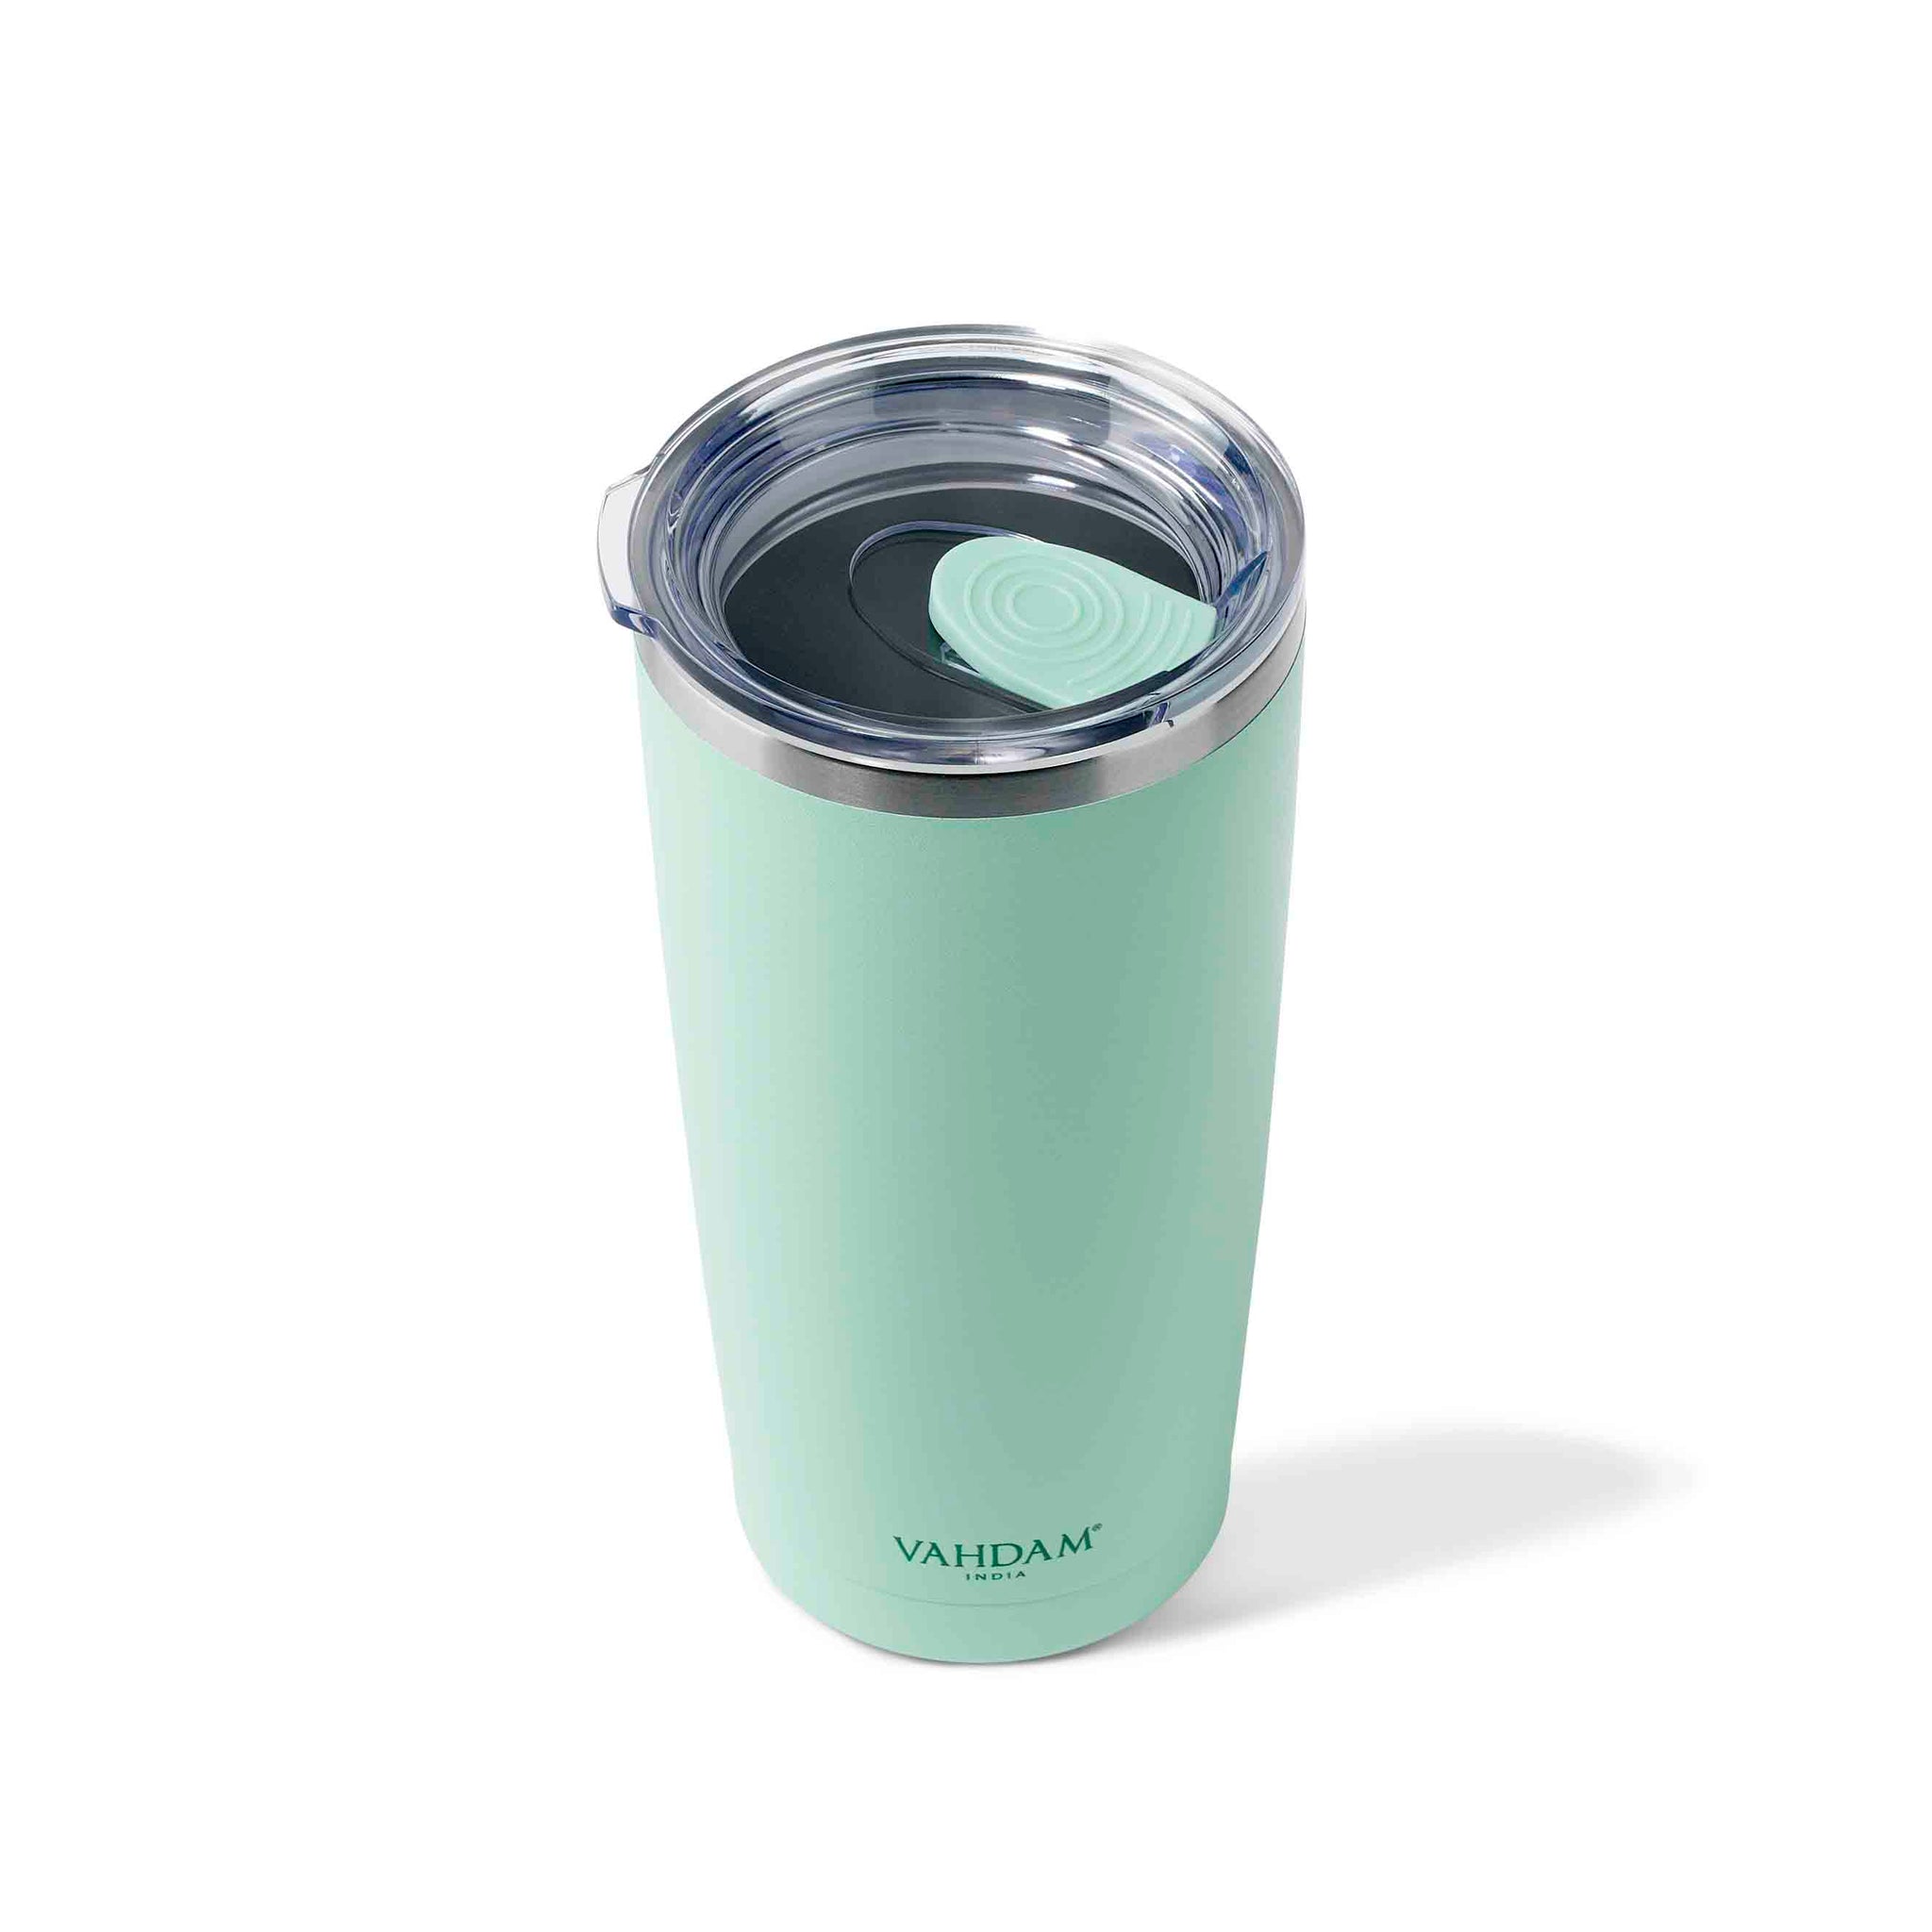 9 Insulated Tumblers You'll Never Want to Leave Home Without